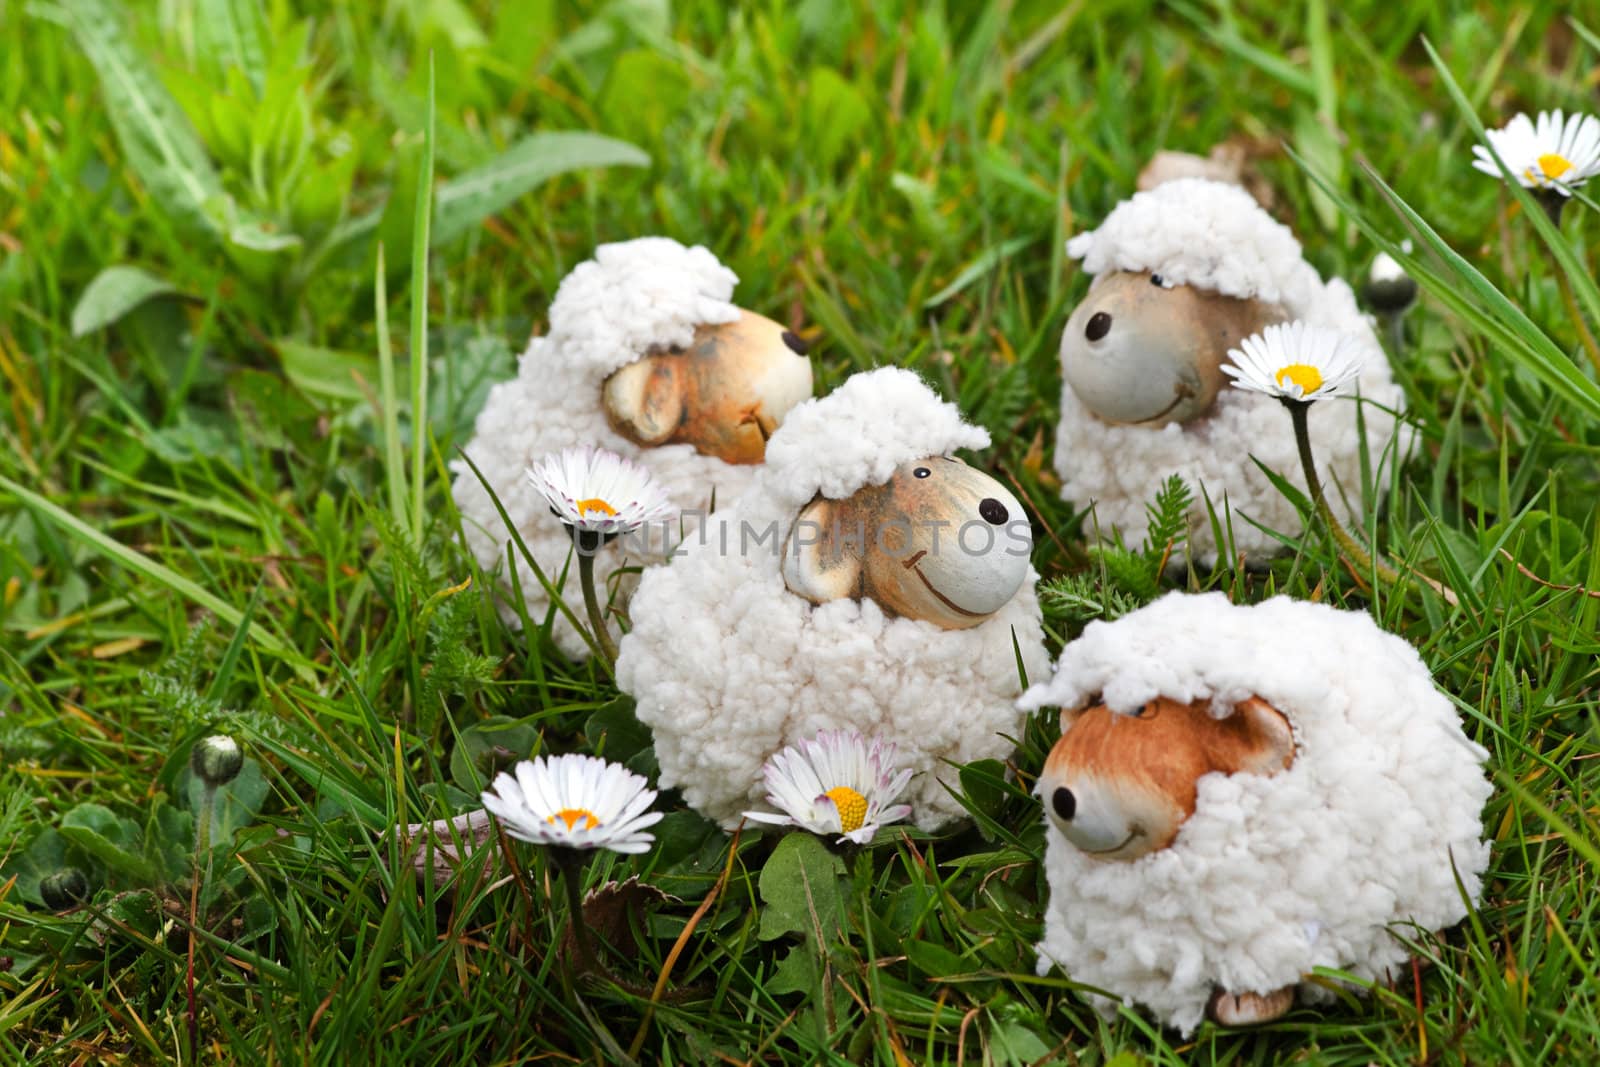 Spring- or easter decoration - funny little sheep in grass with daisies